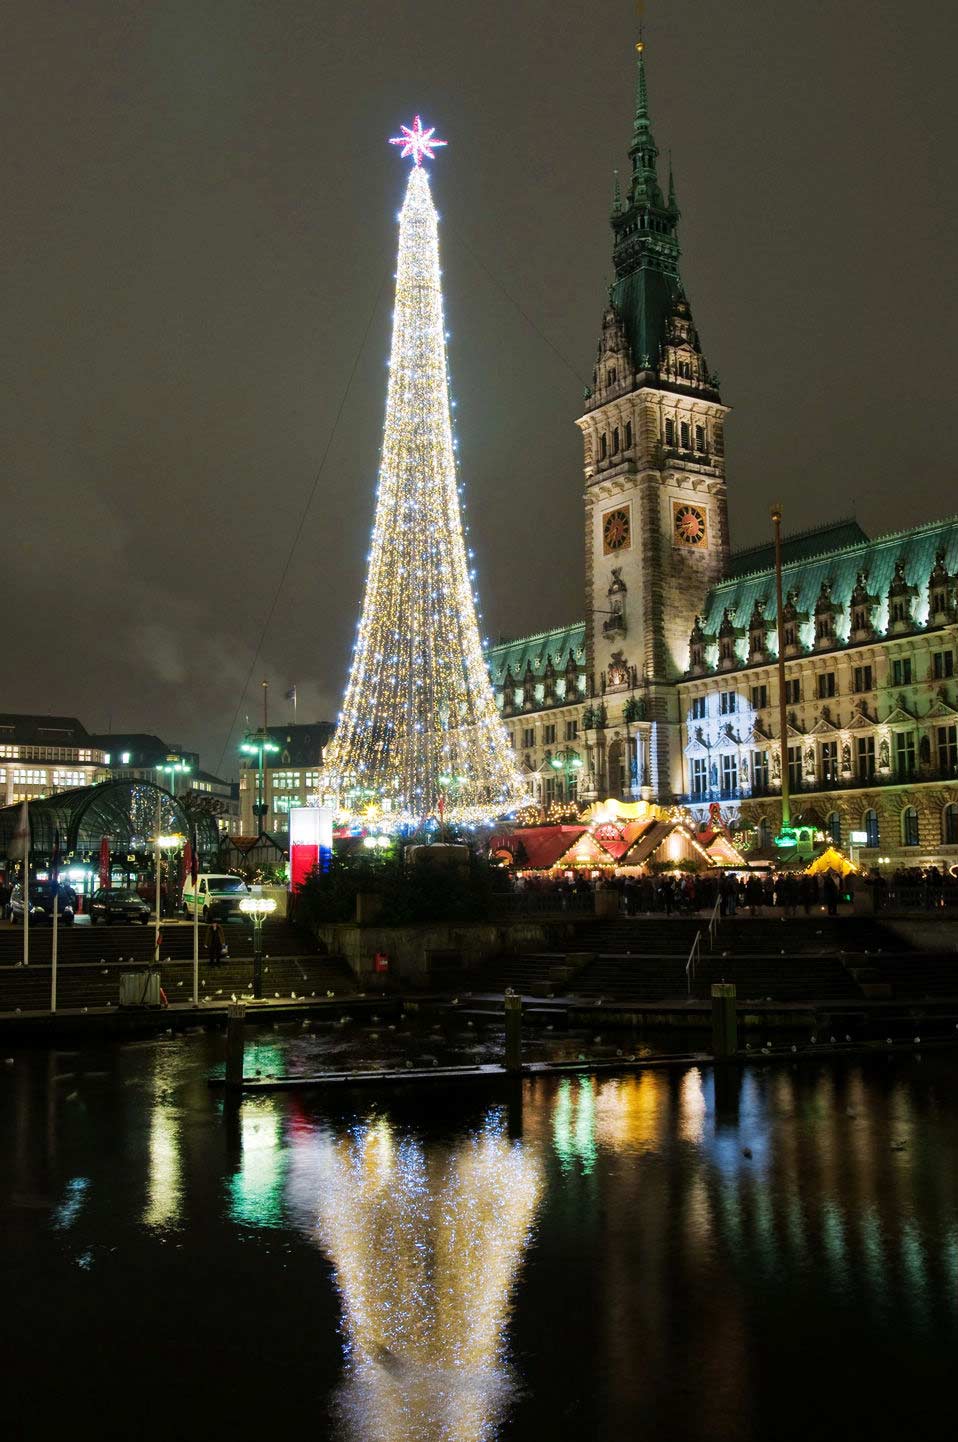 The Christmas market in Hamburg, Germany on November 29, 2012. Hamburg has shaken off its wartime damage to emerge into a glorious present. (Provided to People's Daily Online)